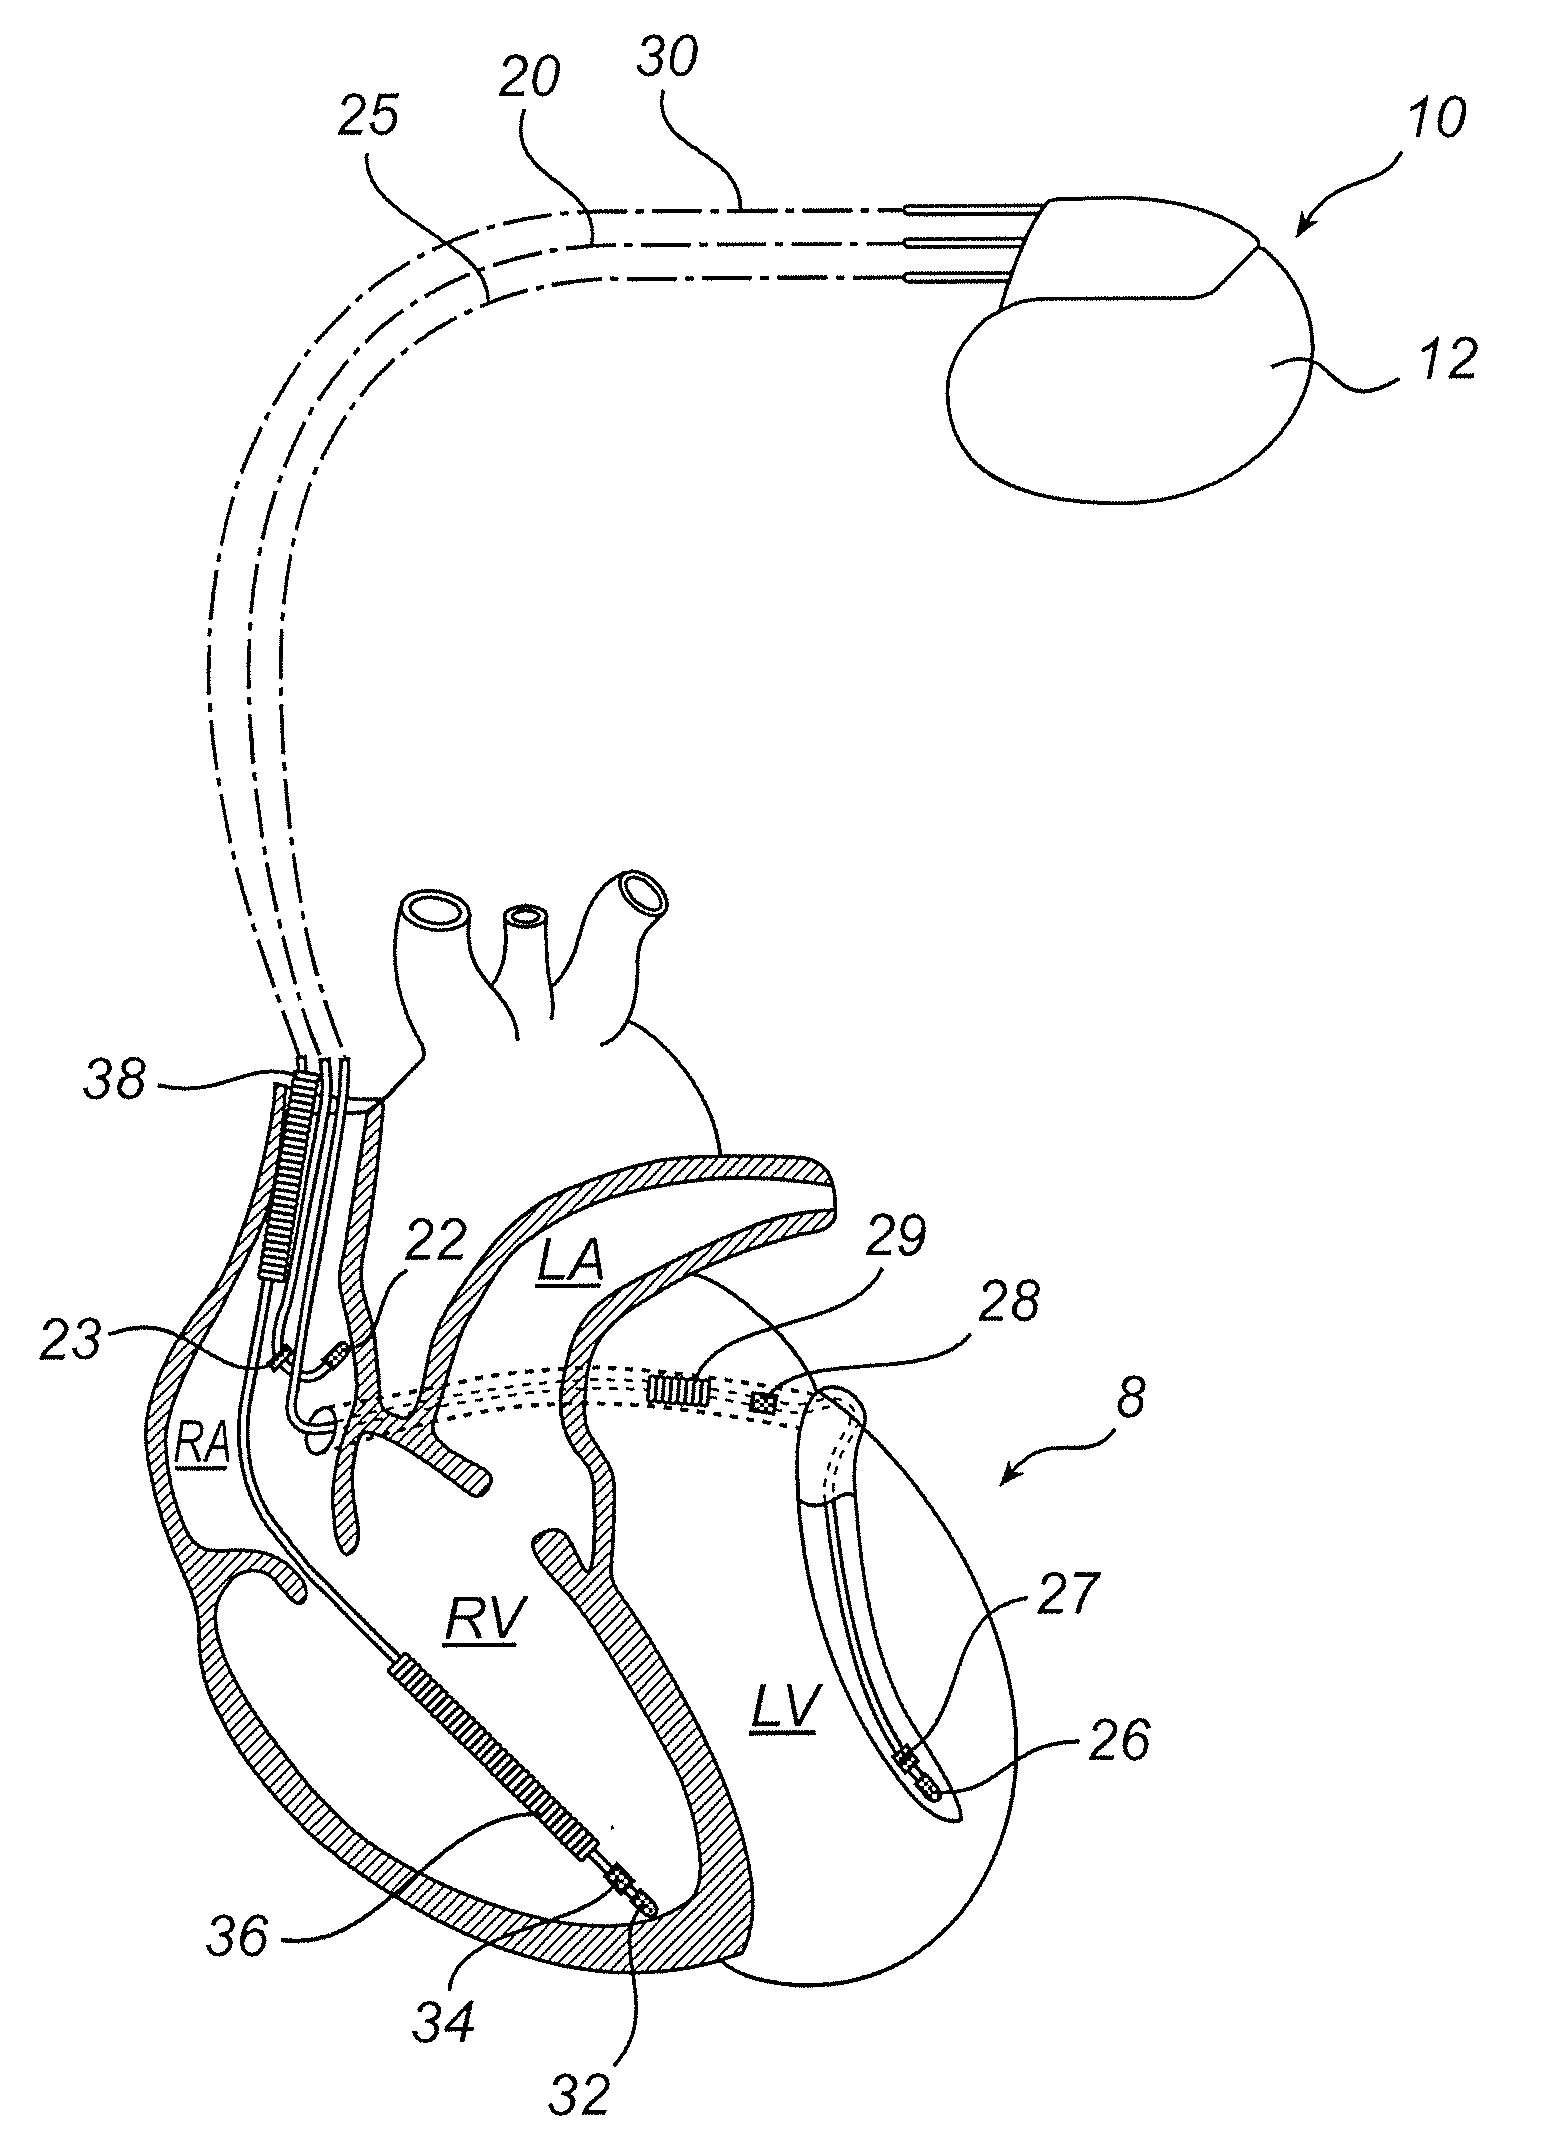 Implantable medical device and method for such a device for predicting hf status of a patient